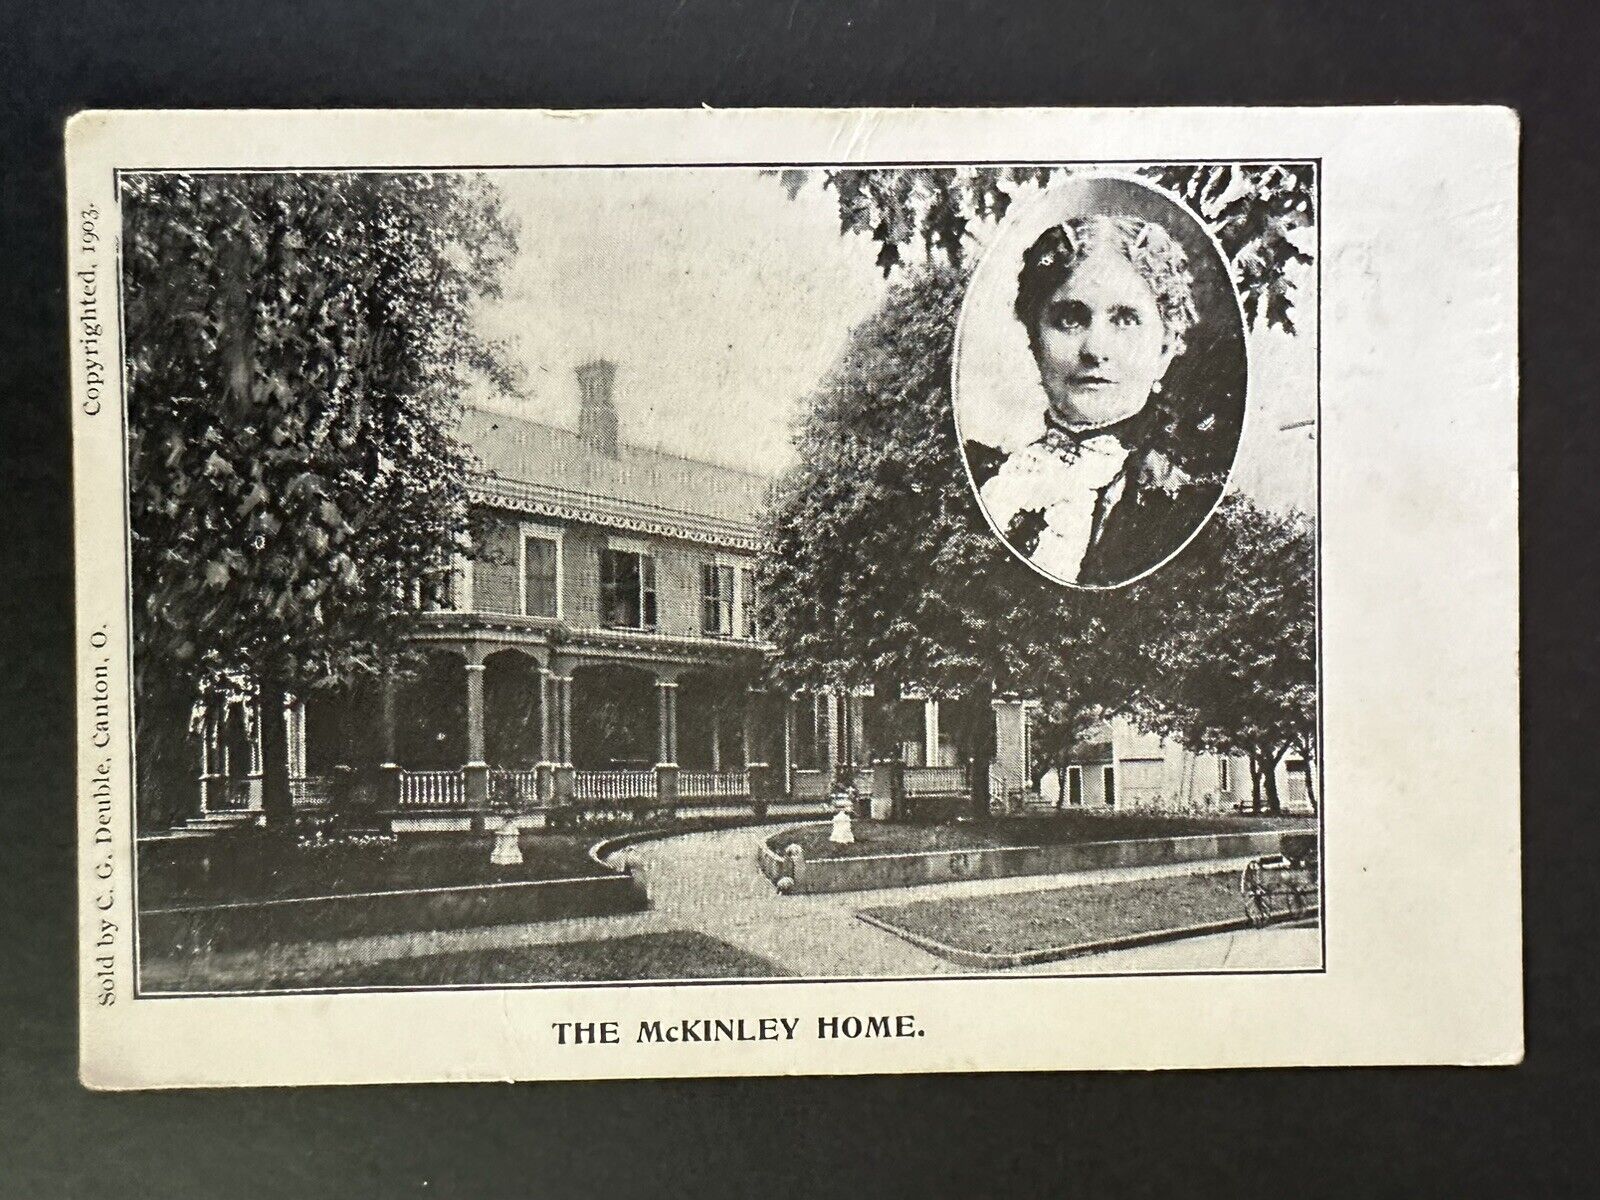 Postcard Private Mailing Card “The McKinley Home” Wife Ida 1903 Black & White